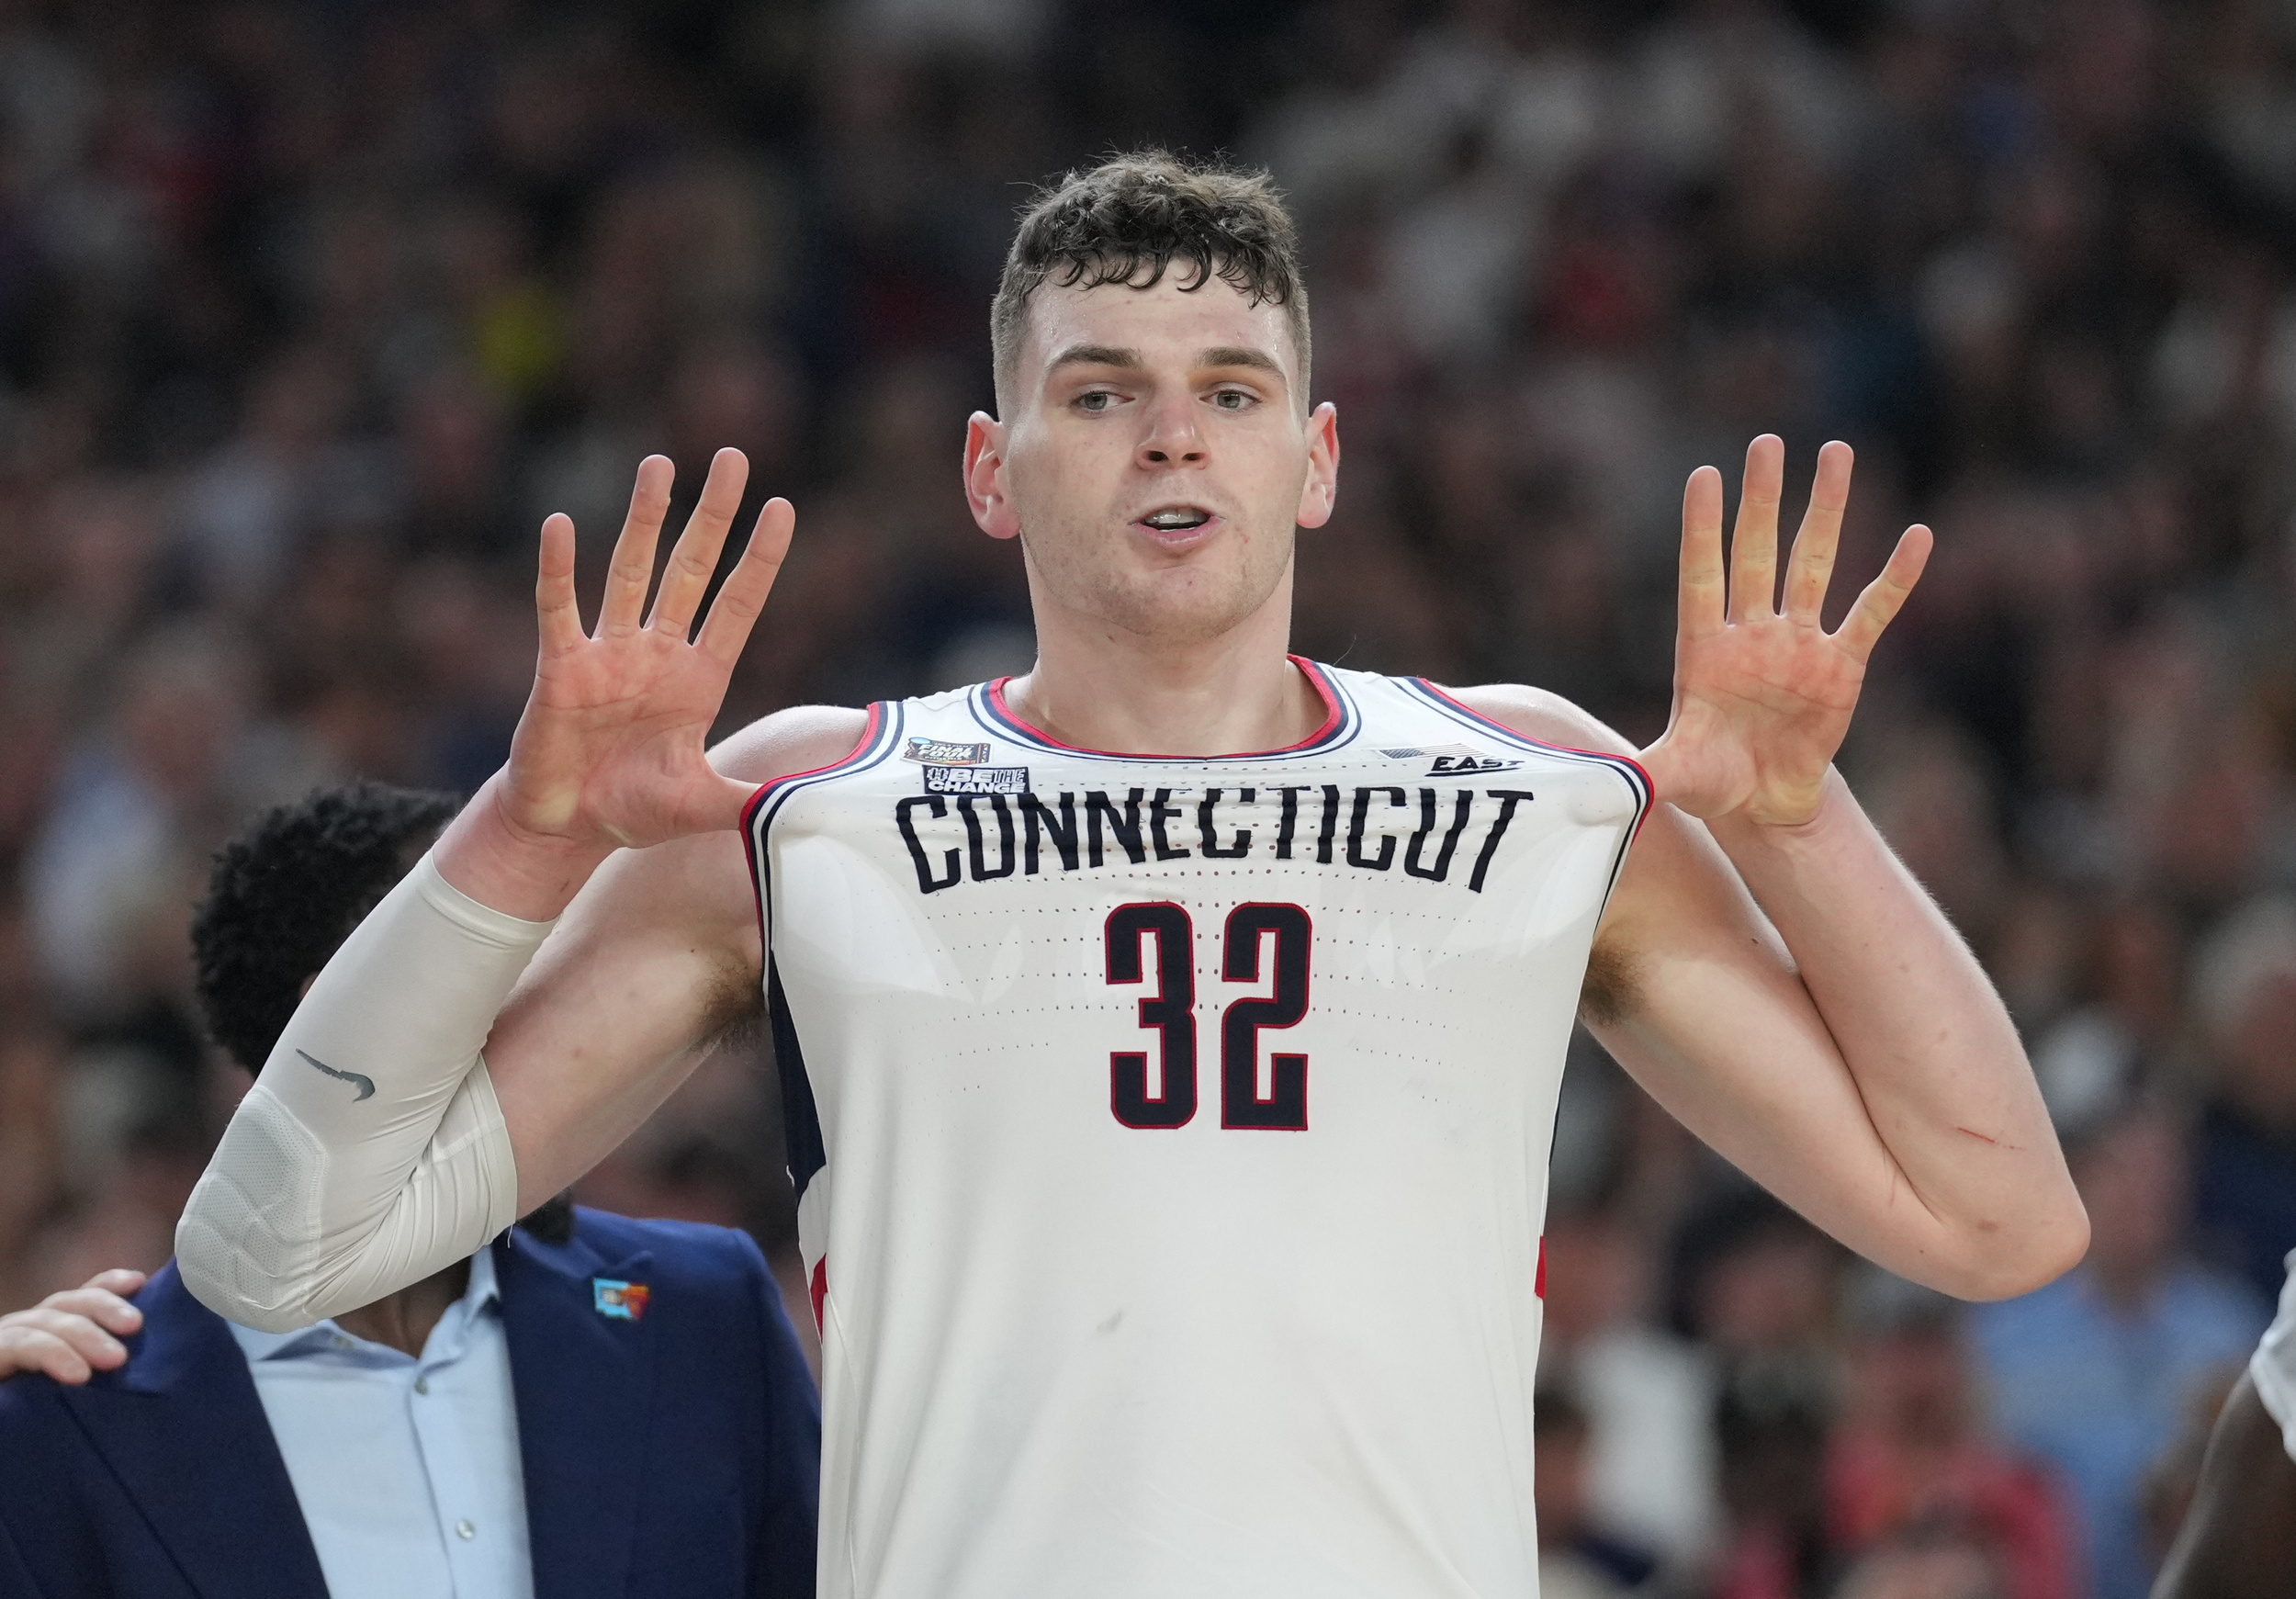 how excellent march madness showing impacted donovan clingan's draft stock